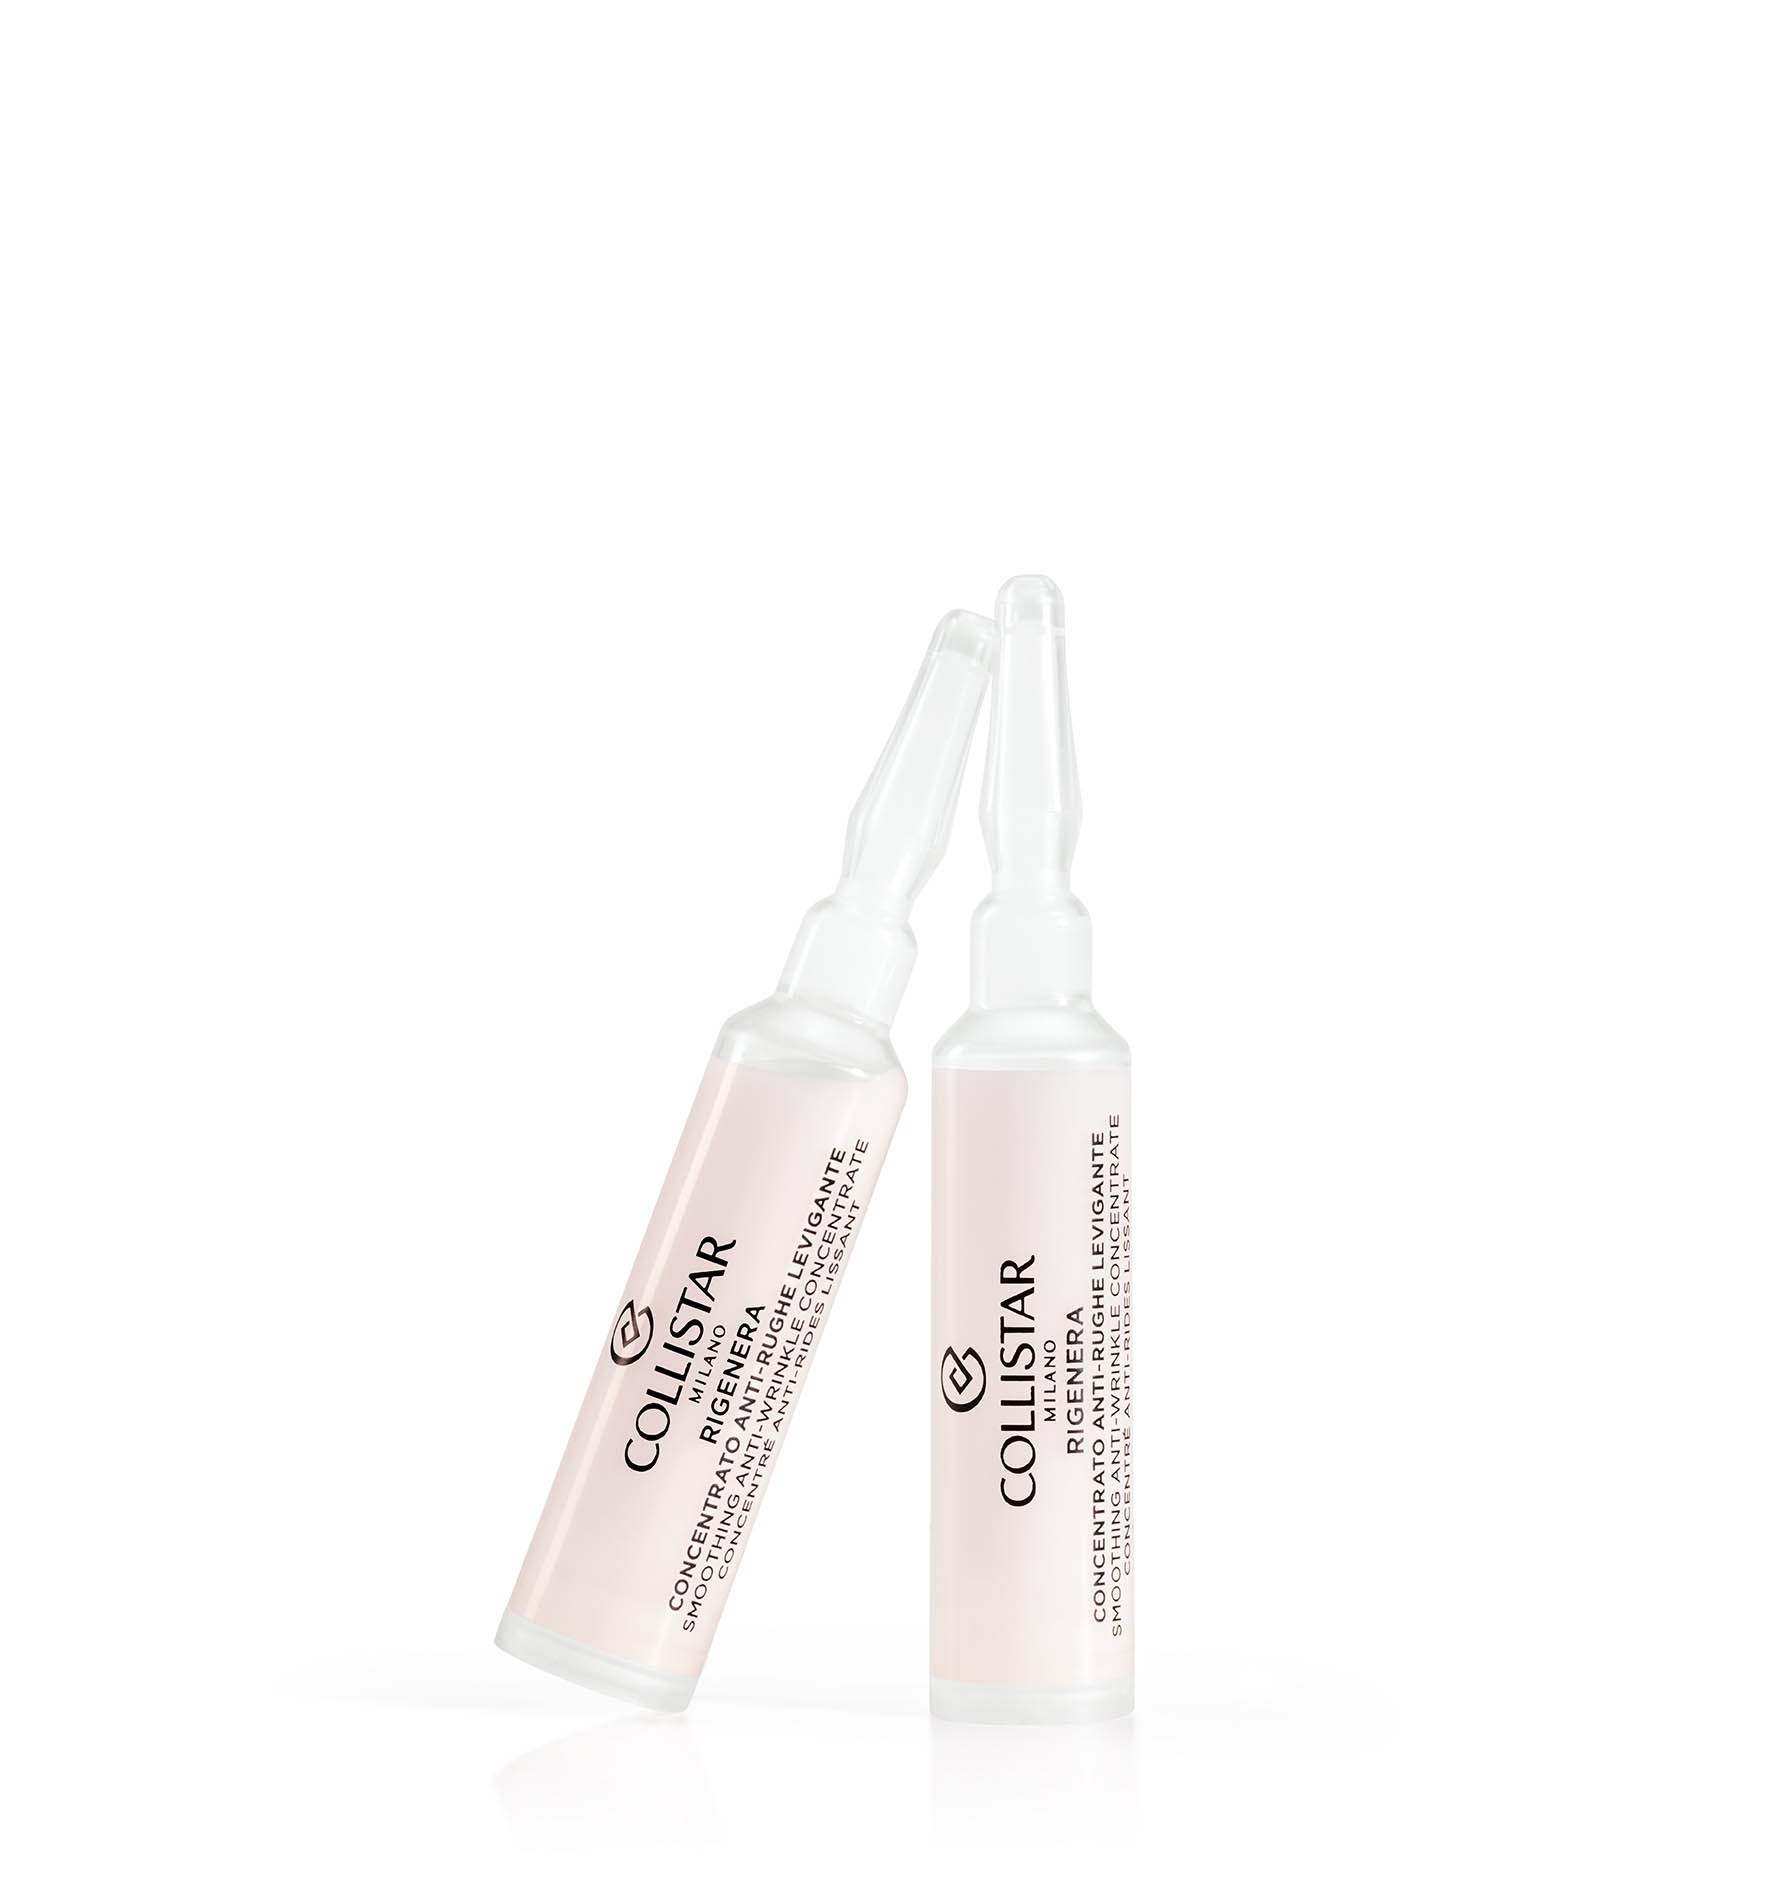 RIGENERA SMOOTHING ANTI-WRINKLE
CONCENTRATE | Collistar - Shop Online Ufficiale